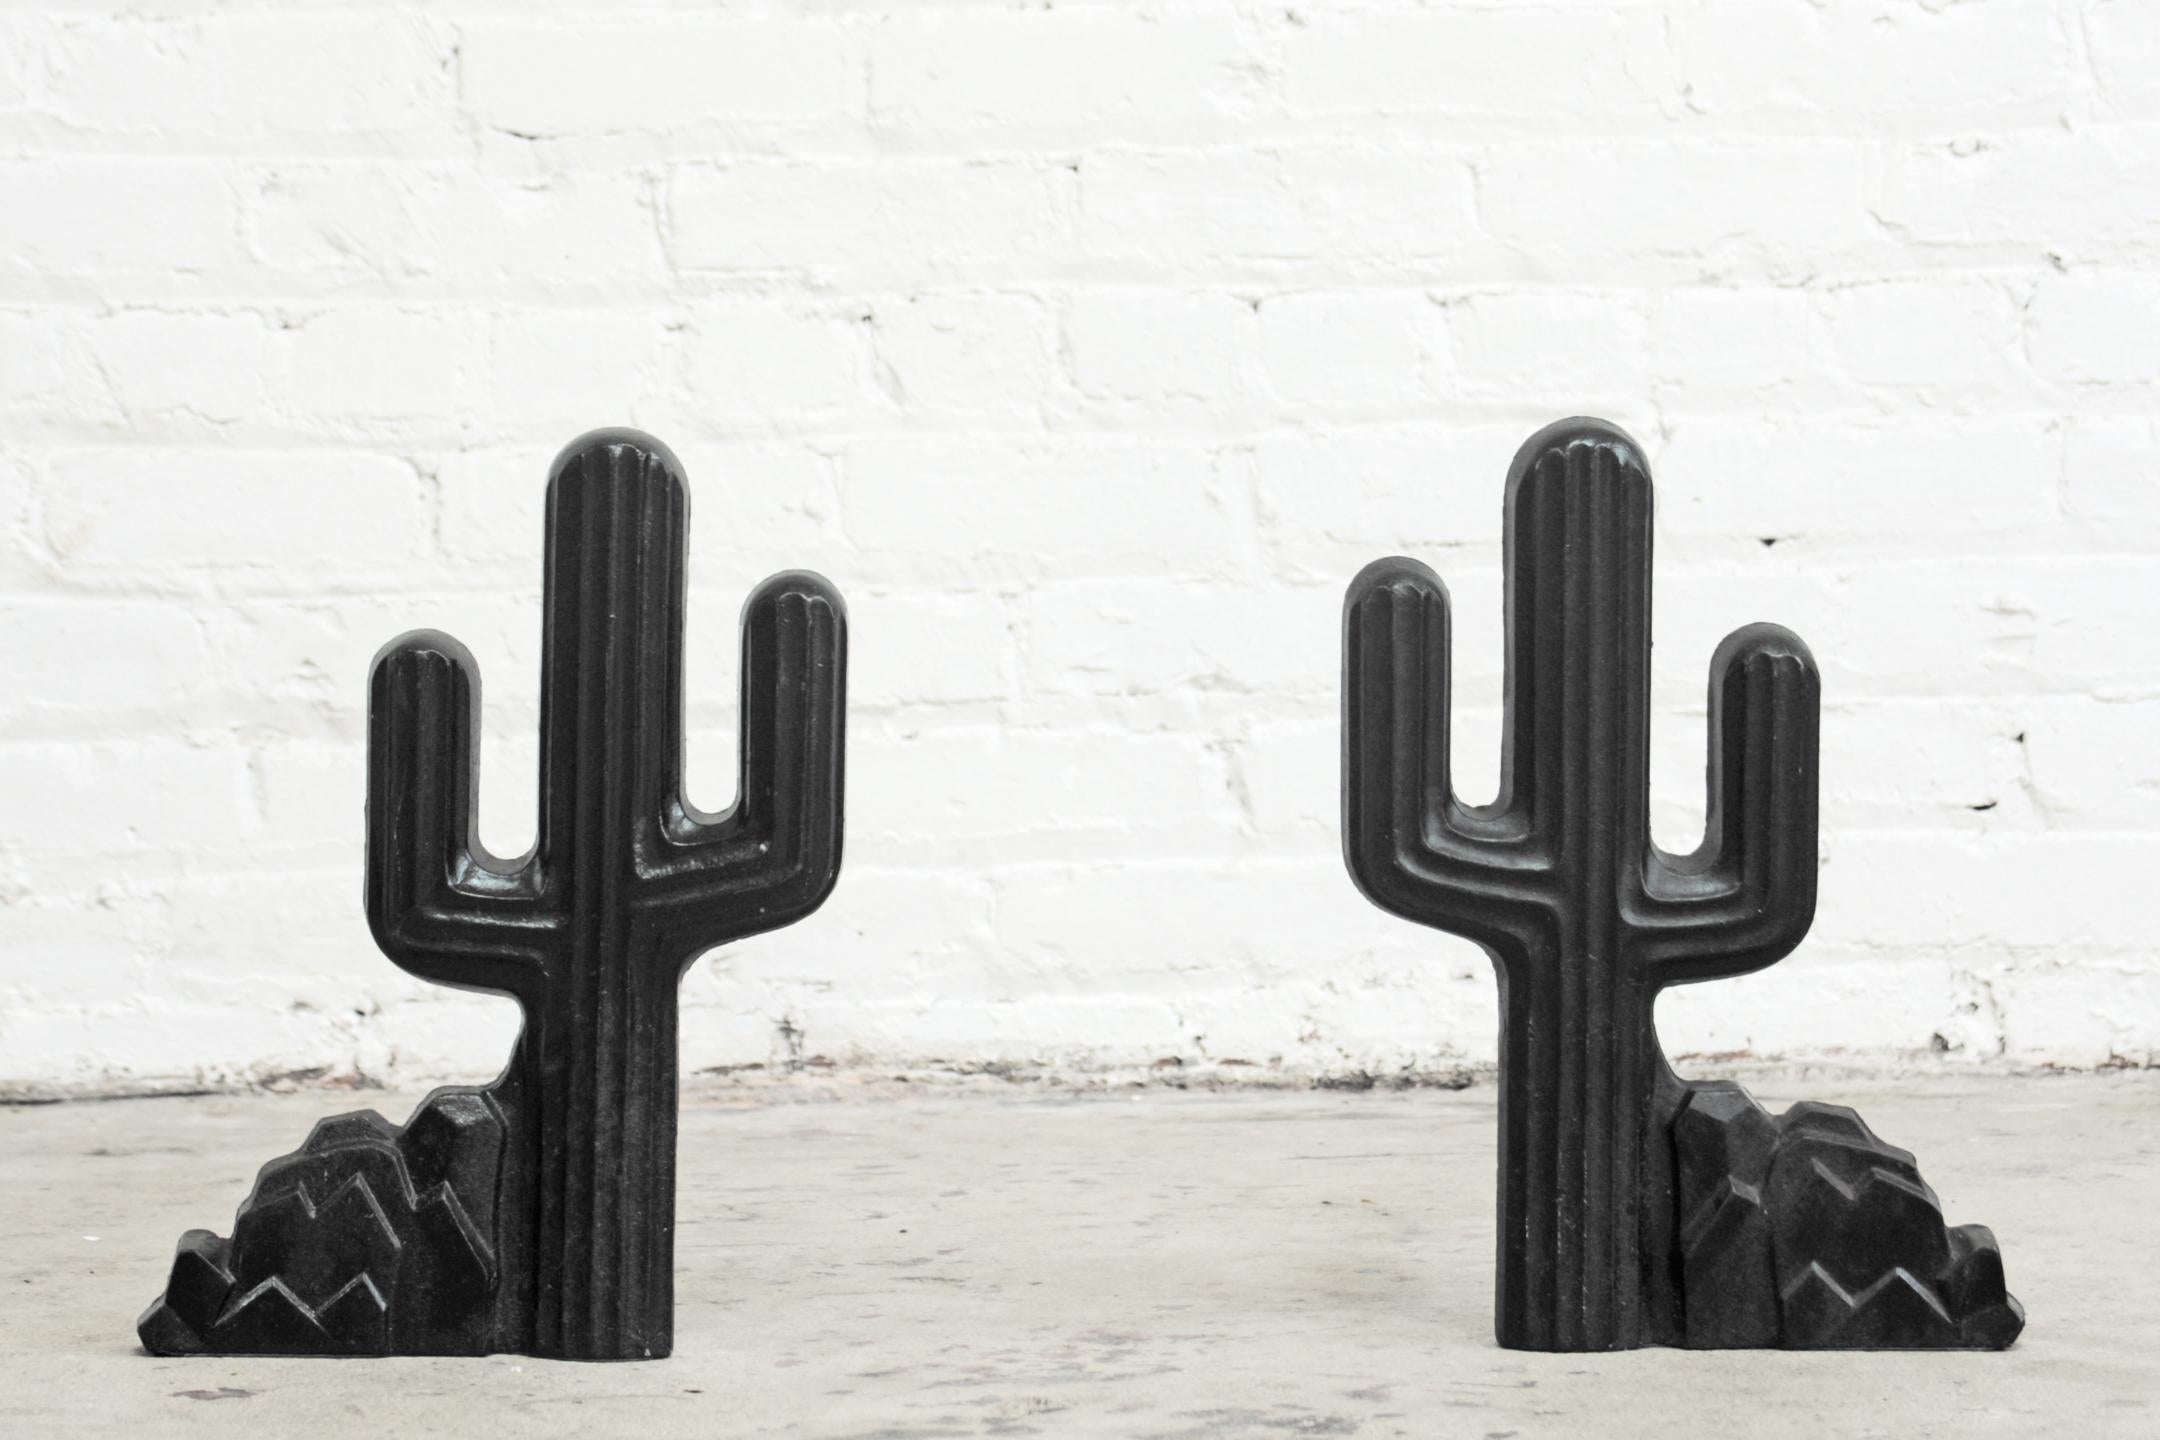 Pair of 1970's cast iron Saguaro Cacti / Cactus Andirons. These make the perfect addition to any desert fireplace or as decor in the home of cacti collectors.